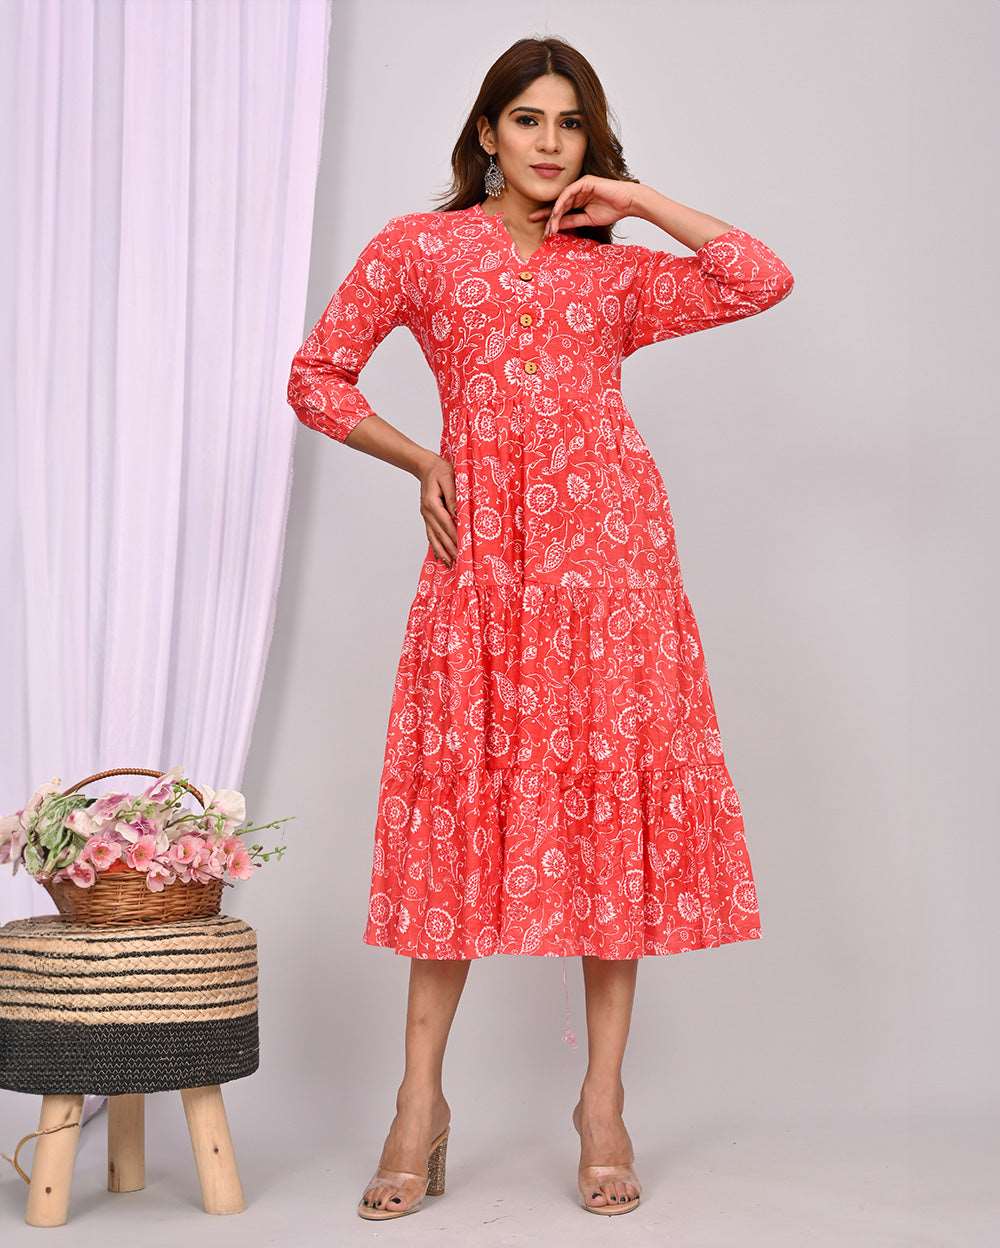 Light Red with White Floral Printed Dress